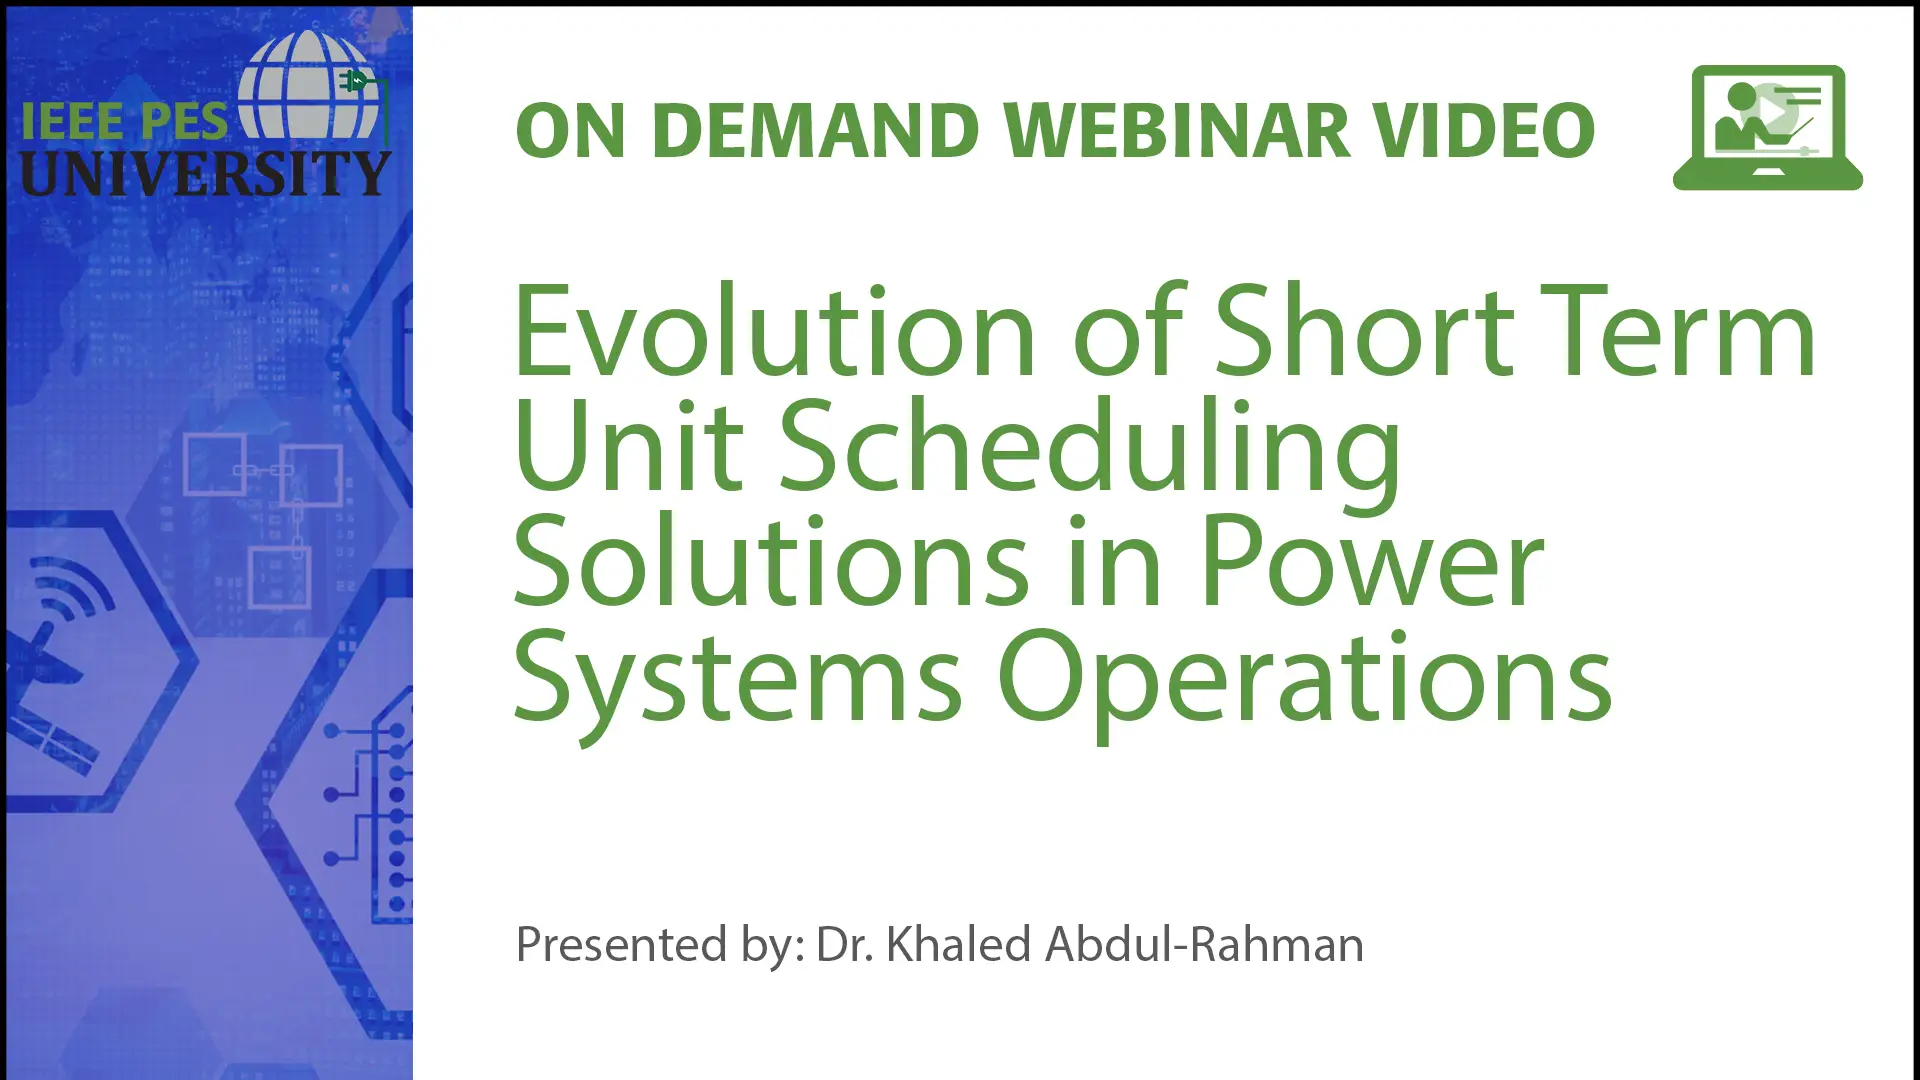 Evolution of Short Term Unit Scheduling Solutions in Power Systems Operations - Product Detail page title (Video)